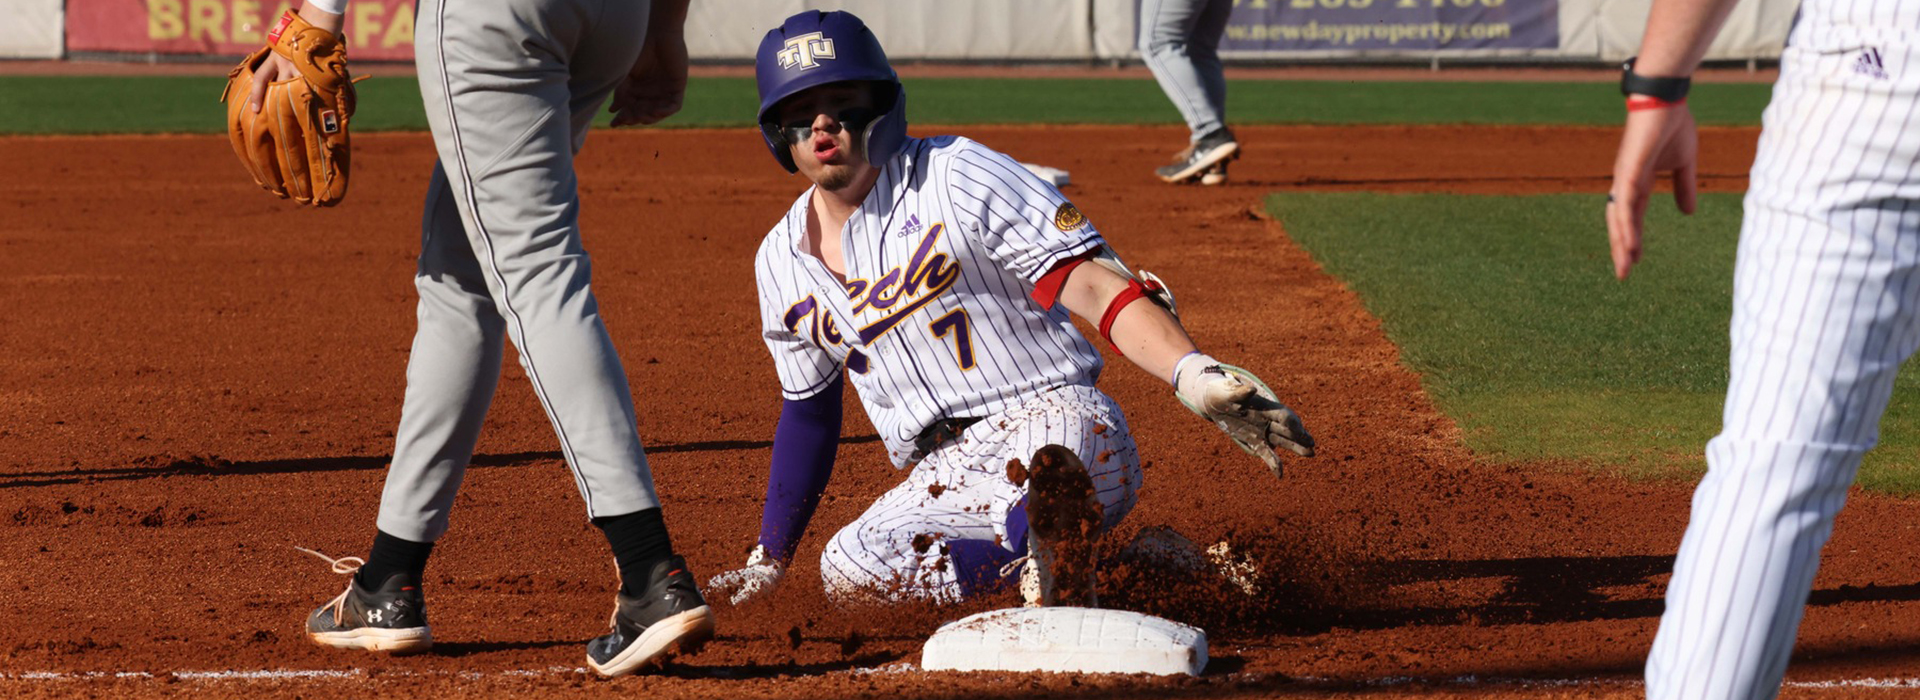 Lions upend Golden Eagles in series opener, 6-5